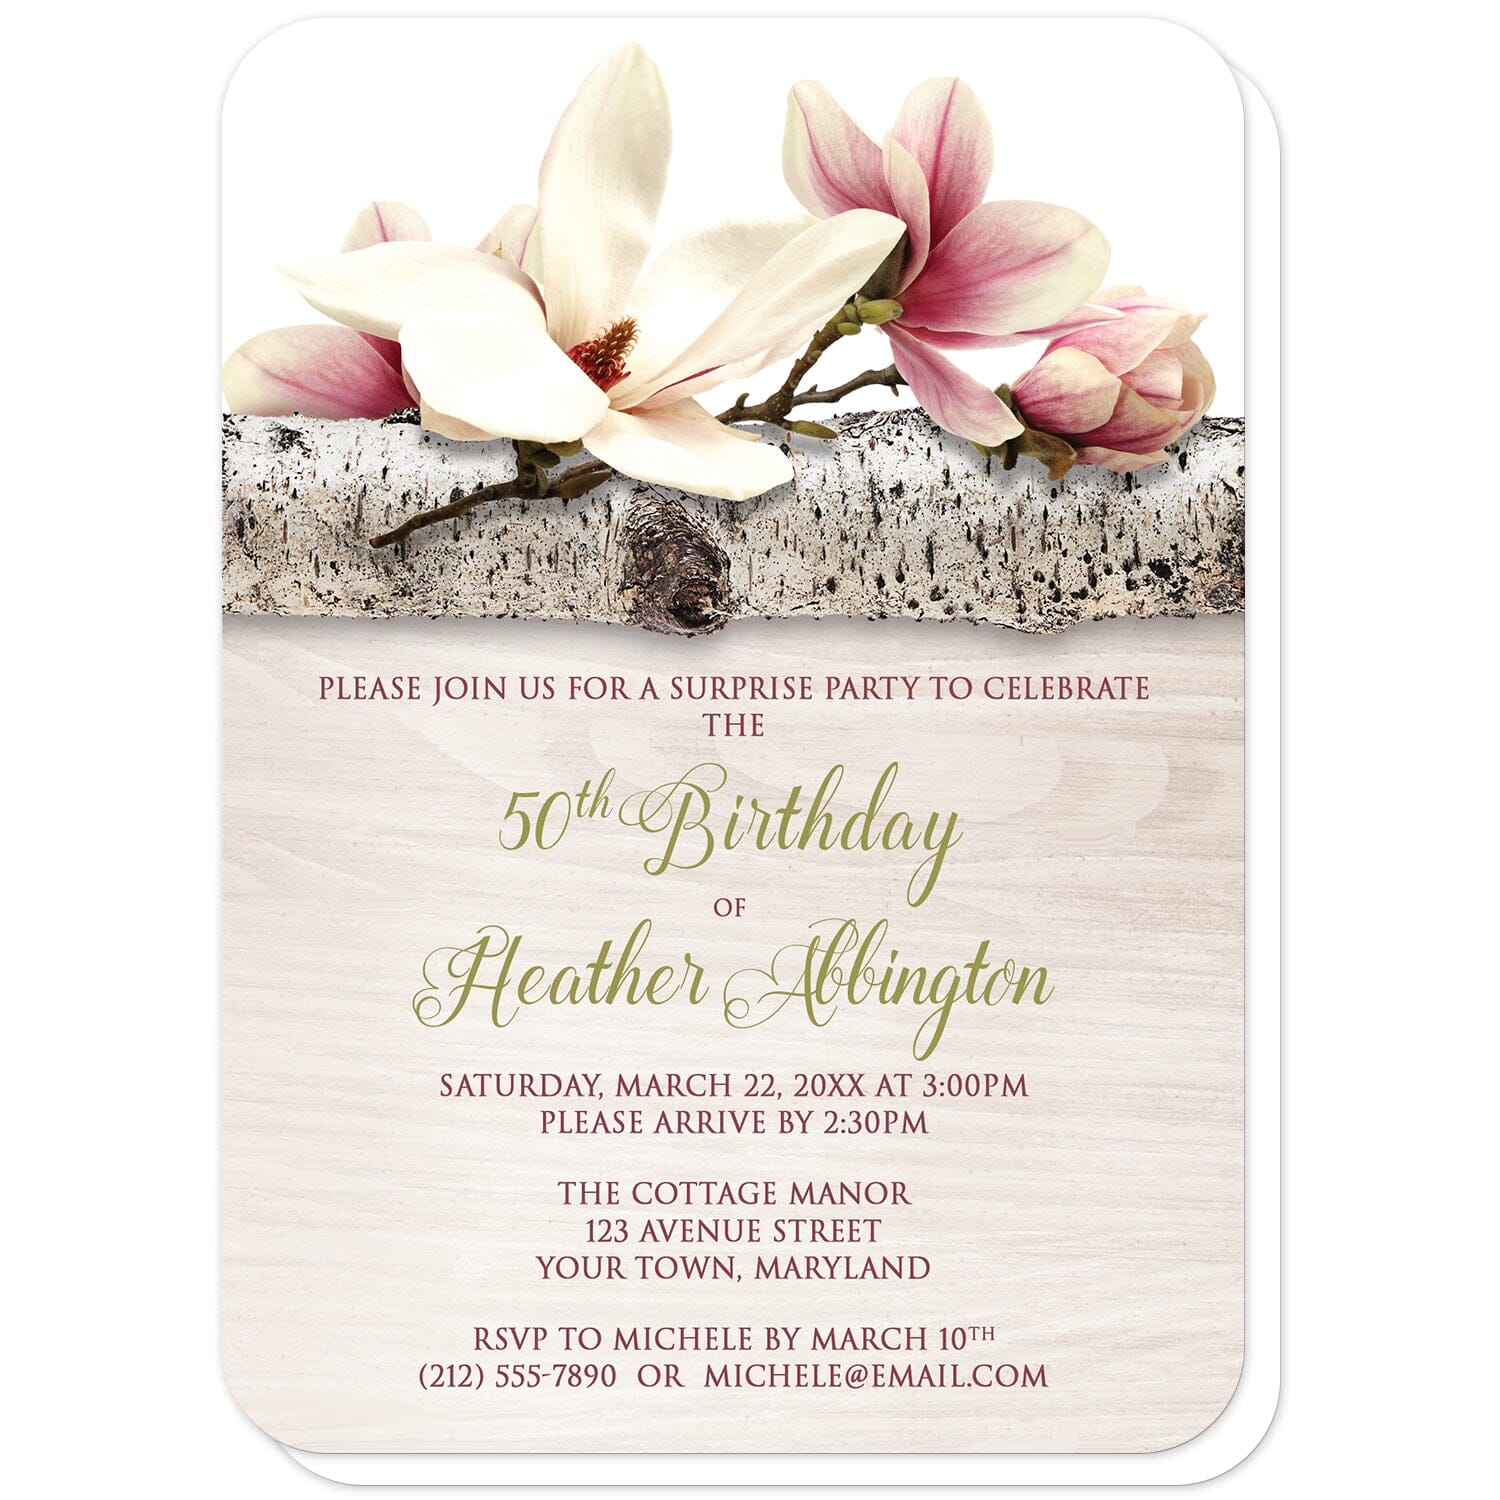 Magnolia Birch Light Wood Floral Birthday Invitations (with rounded corners) at Artistically Invited. Beautiful magnolia birch light wood floral birthday invitations with pink and white magnolia flowers laying on a birch tree branch along the top. Your personalized birthday party details are custom printed in dark pink and light olive green over a light wood background illustration. 